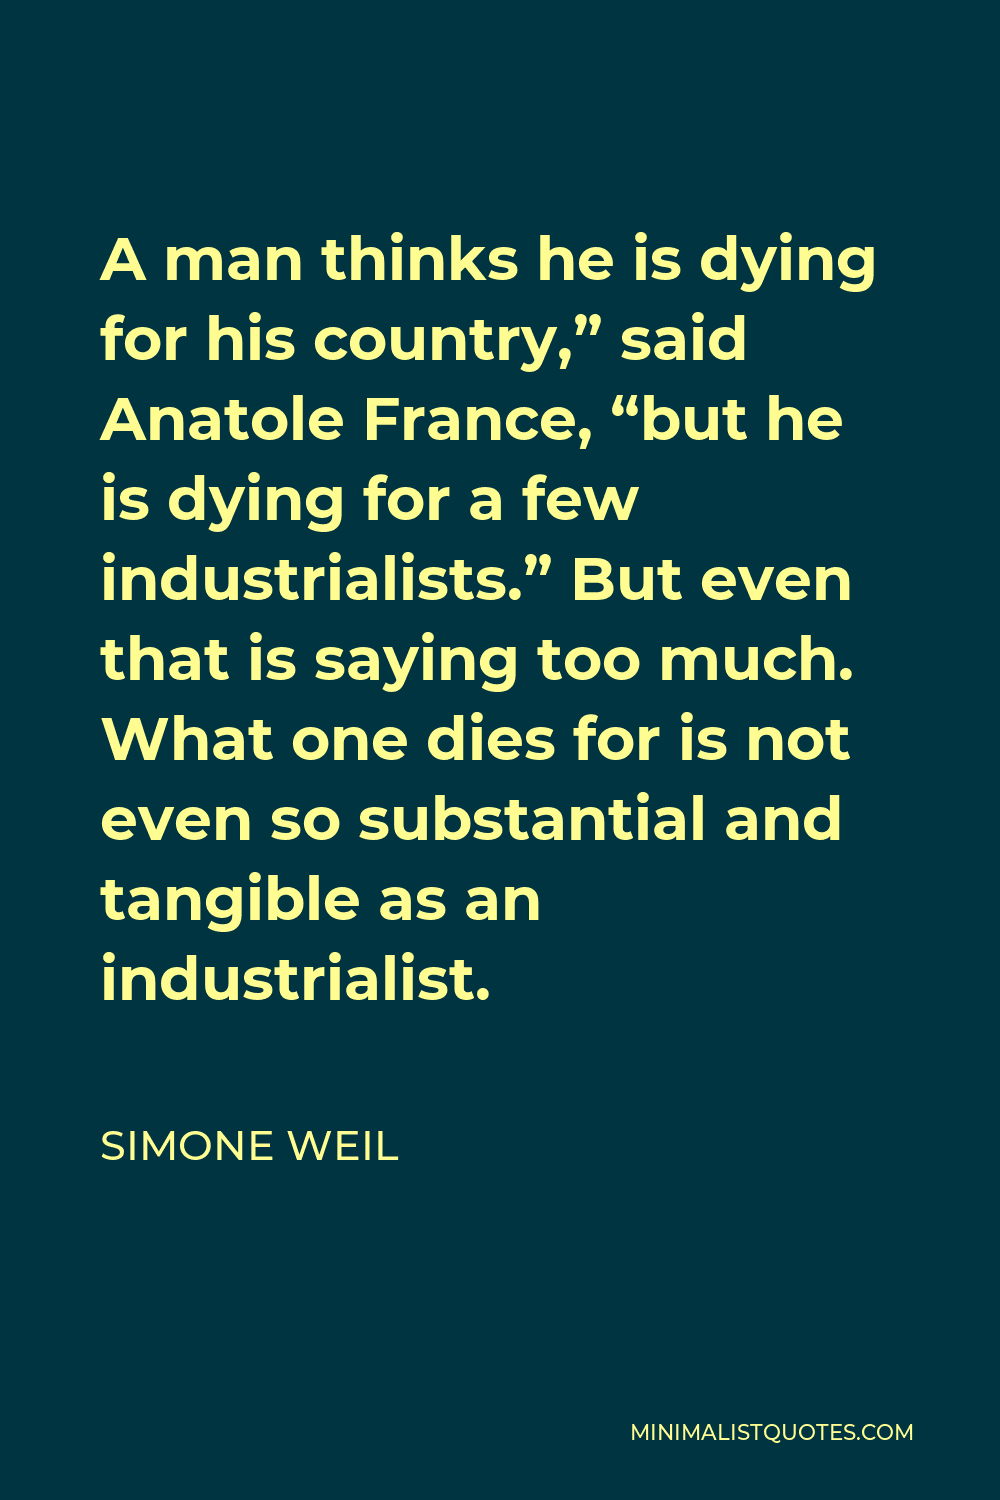 Simone Weil Quote - A man thinks he is dying for his country,” said Anatole France, “but he is dying for a few industrialists.” But even that is saying too much. What one dies for is not even so substantial and tangible as an industrialist.